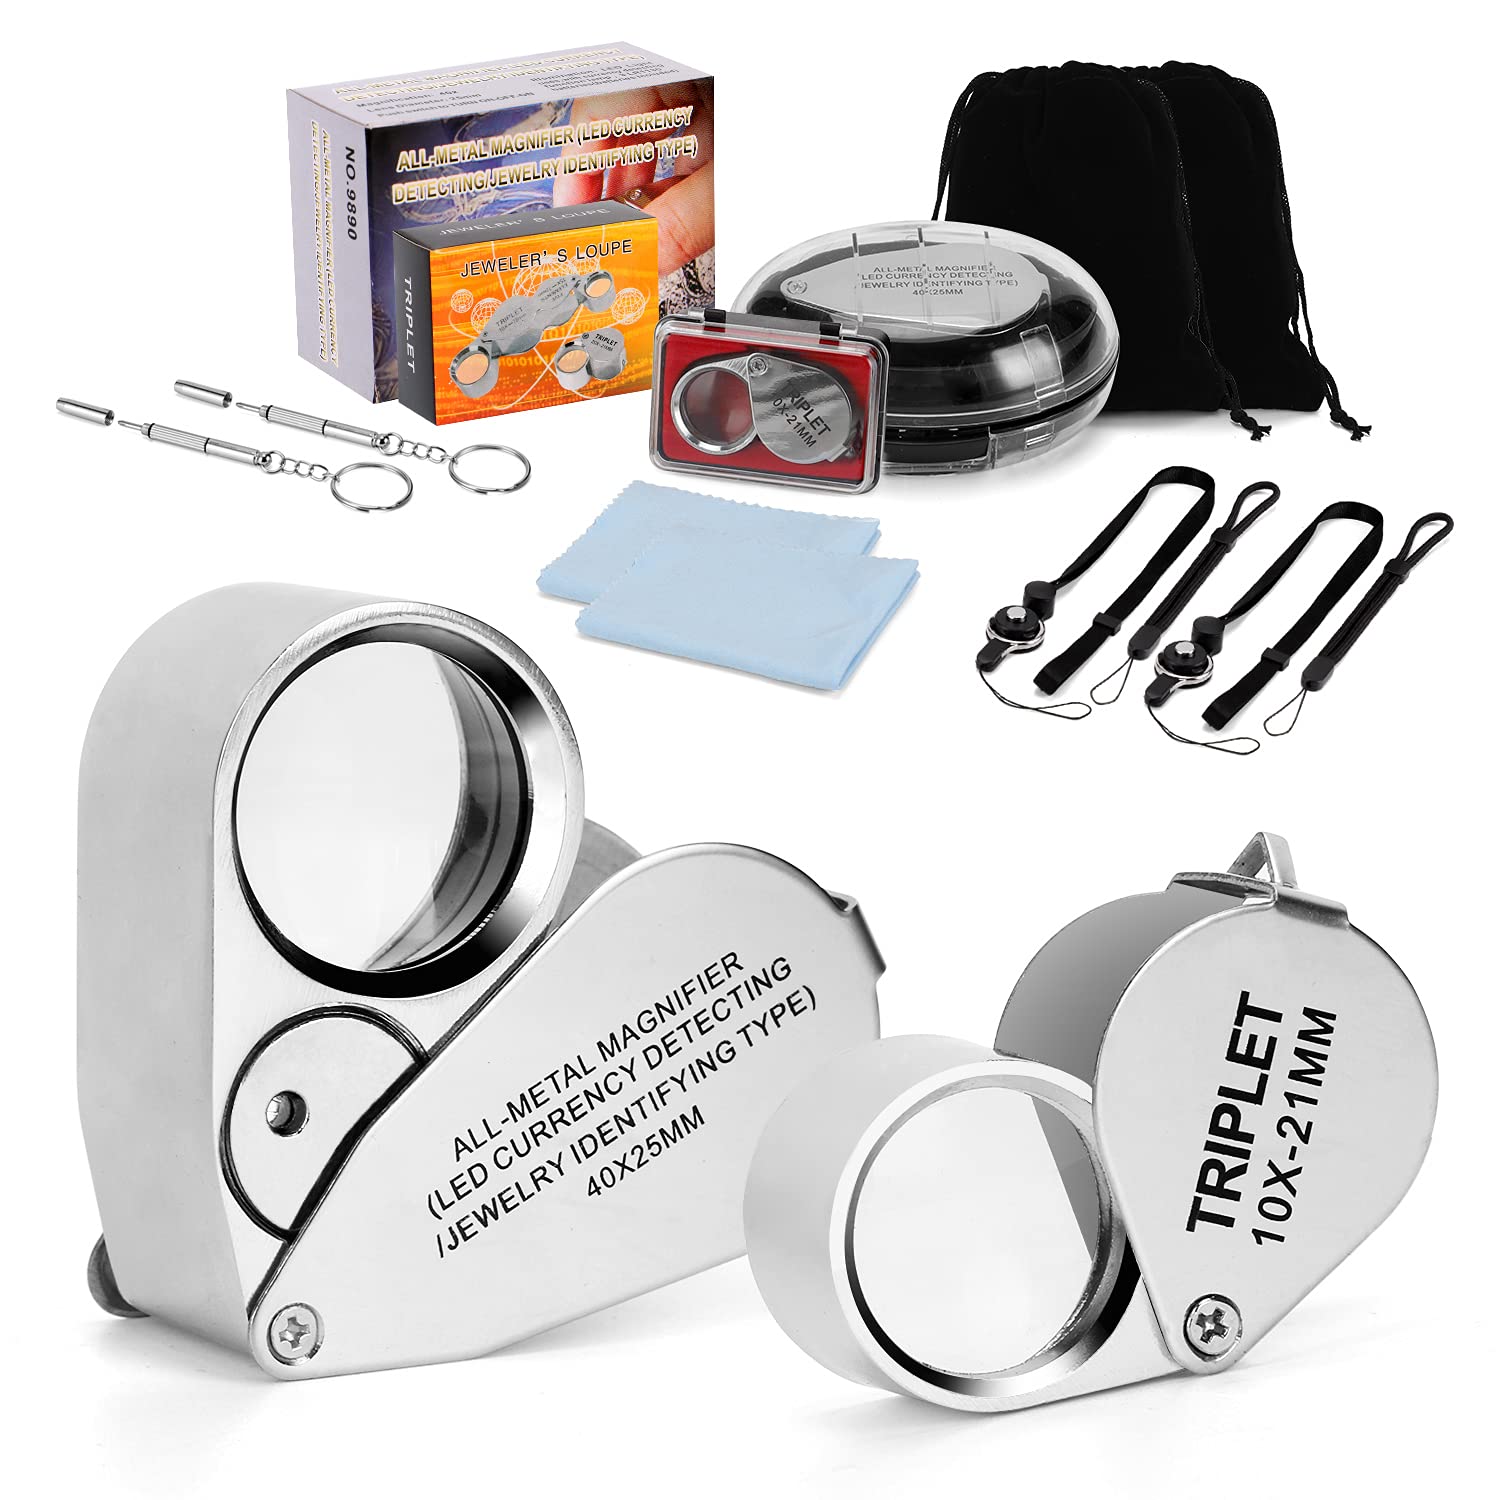 Wanapure 10&40 Metal Jewelry Loop Magnifier, Jewelers Eye Loupe with LED  Light, Includes Drawstring Bag and Adjustable Lanyard, Pocket Illuminated  Magnifying Glass for Gems, Rock Collection 10x & 40x